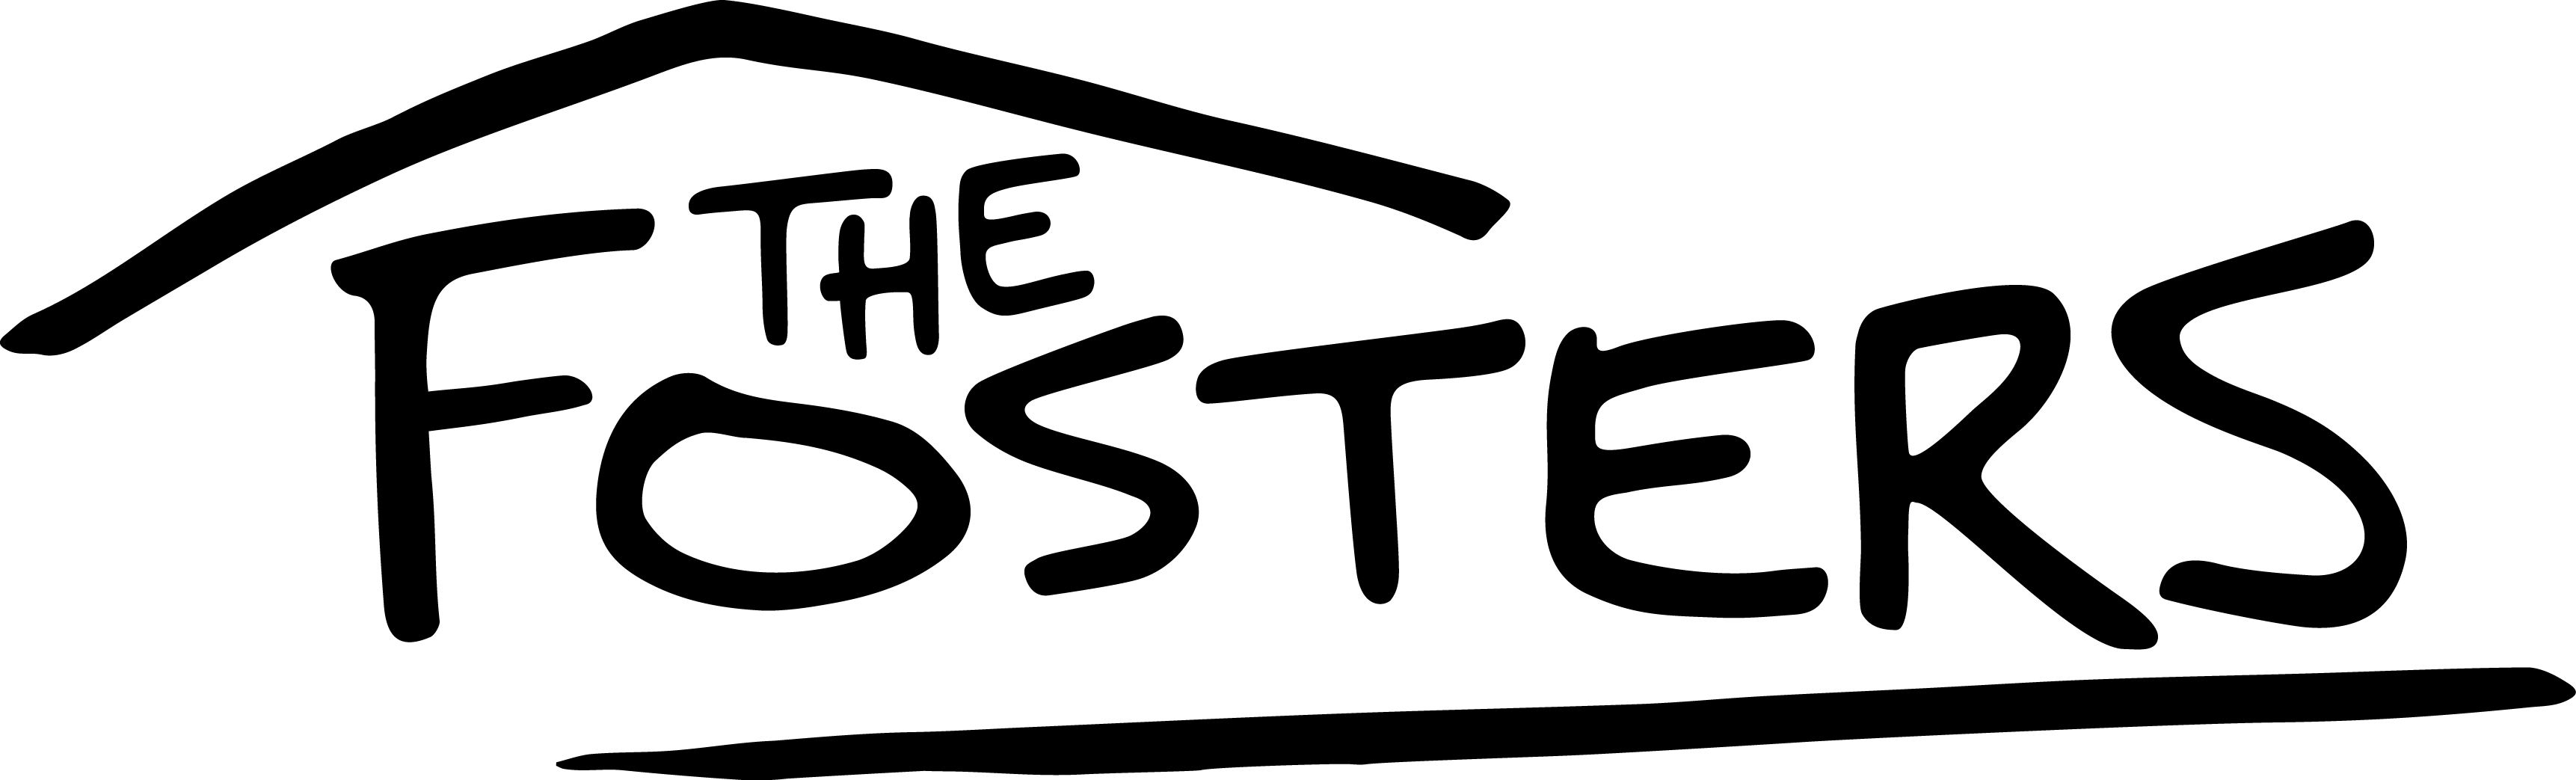 The Fosters Logo - The fosters Logos